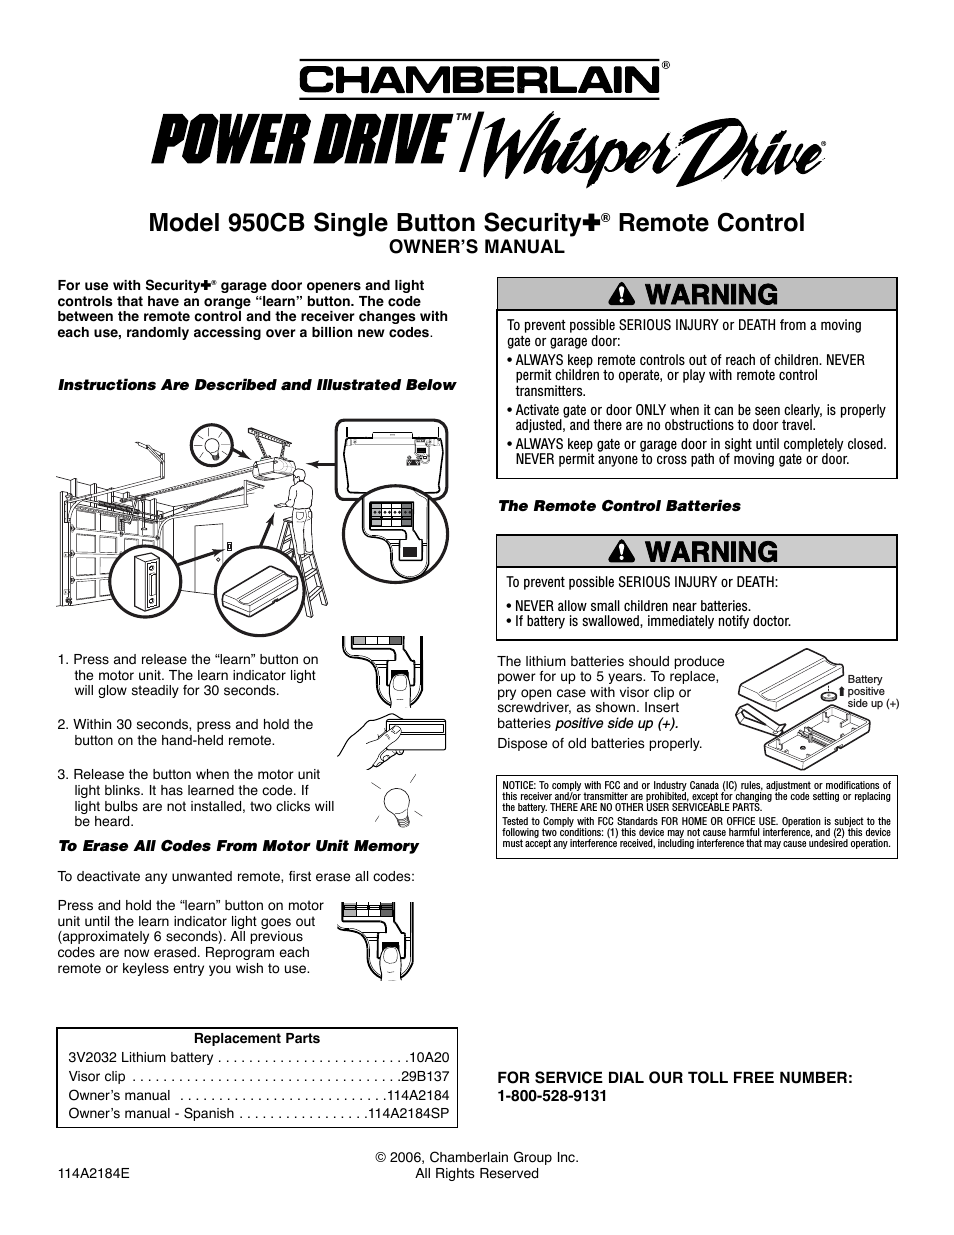 POWER DRIVE 950CB (Page 1)